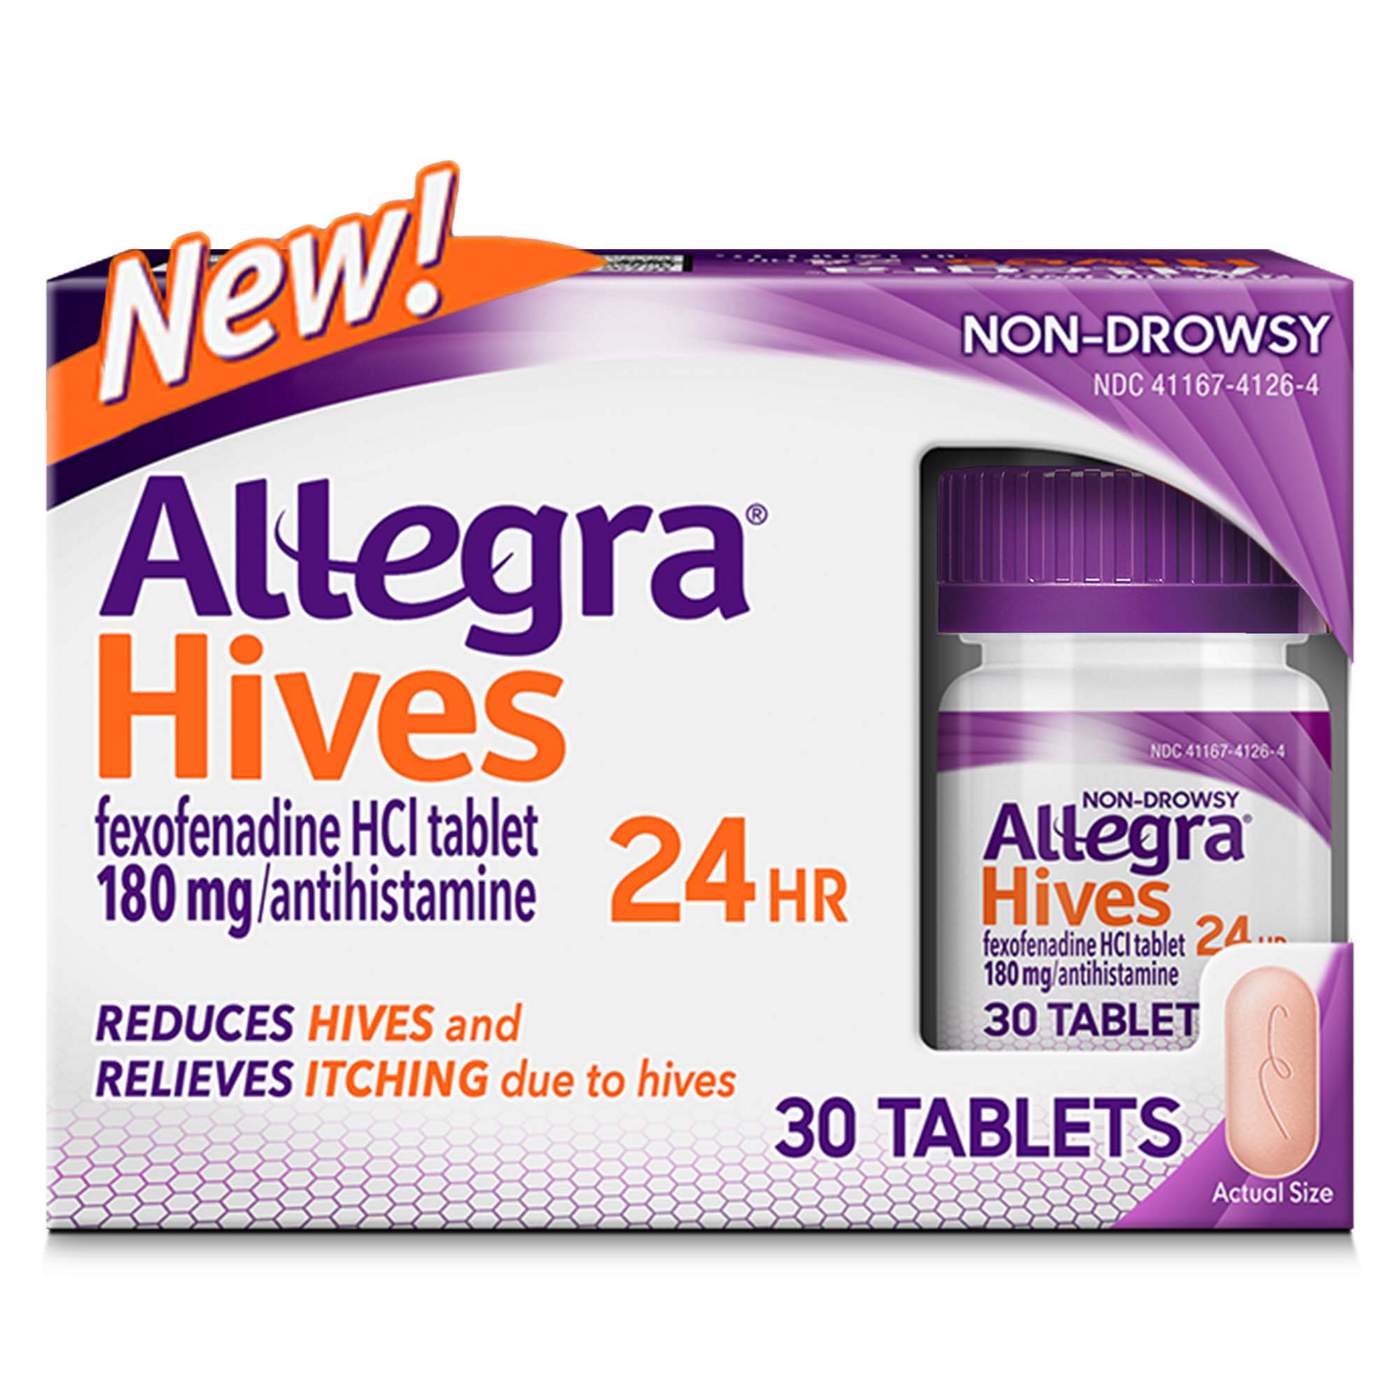 Allegra Hives 24 Hour Non-Drowsy Antihistamine Tablets; image 1 of 9